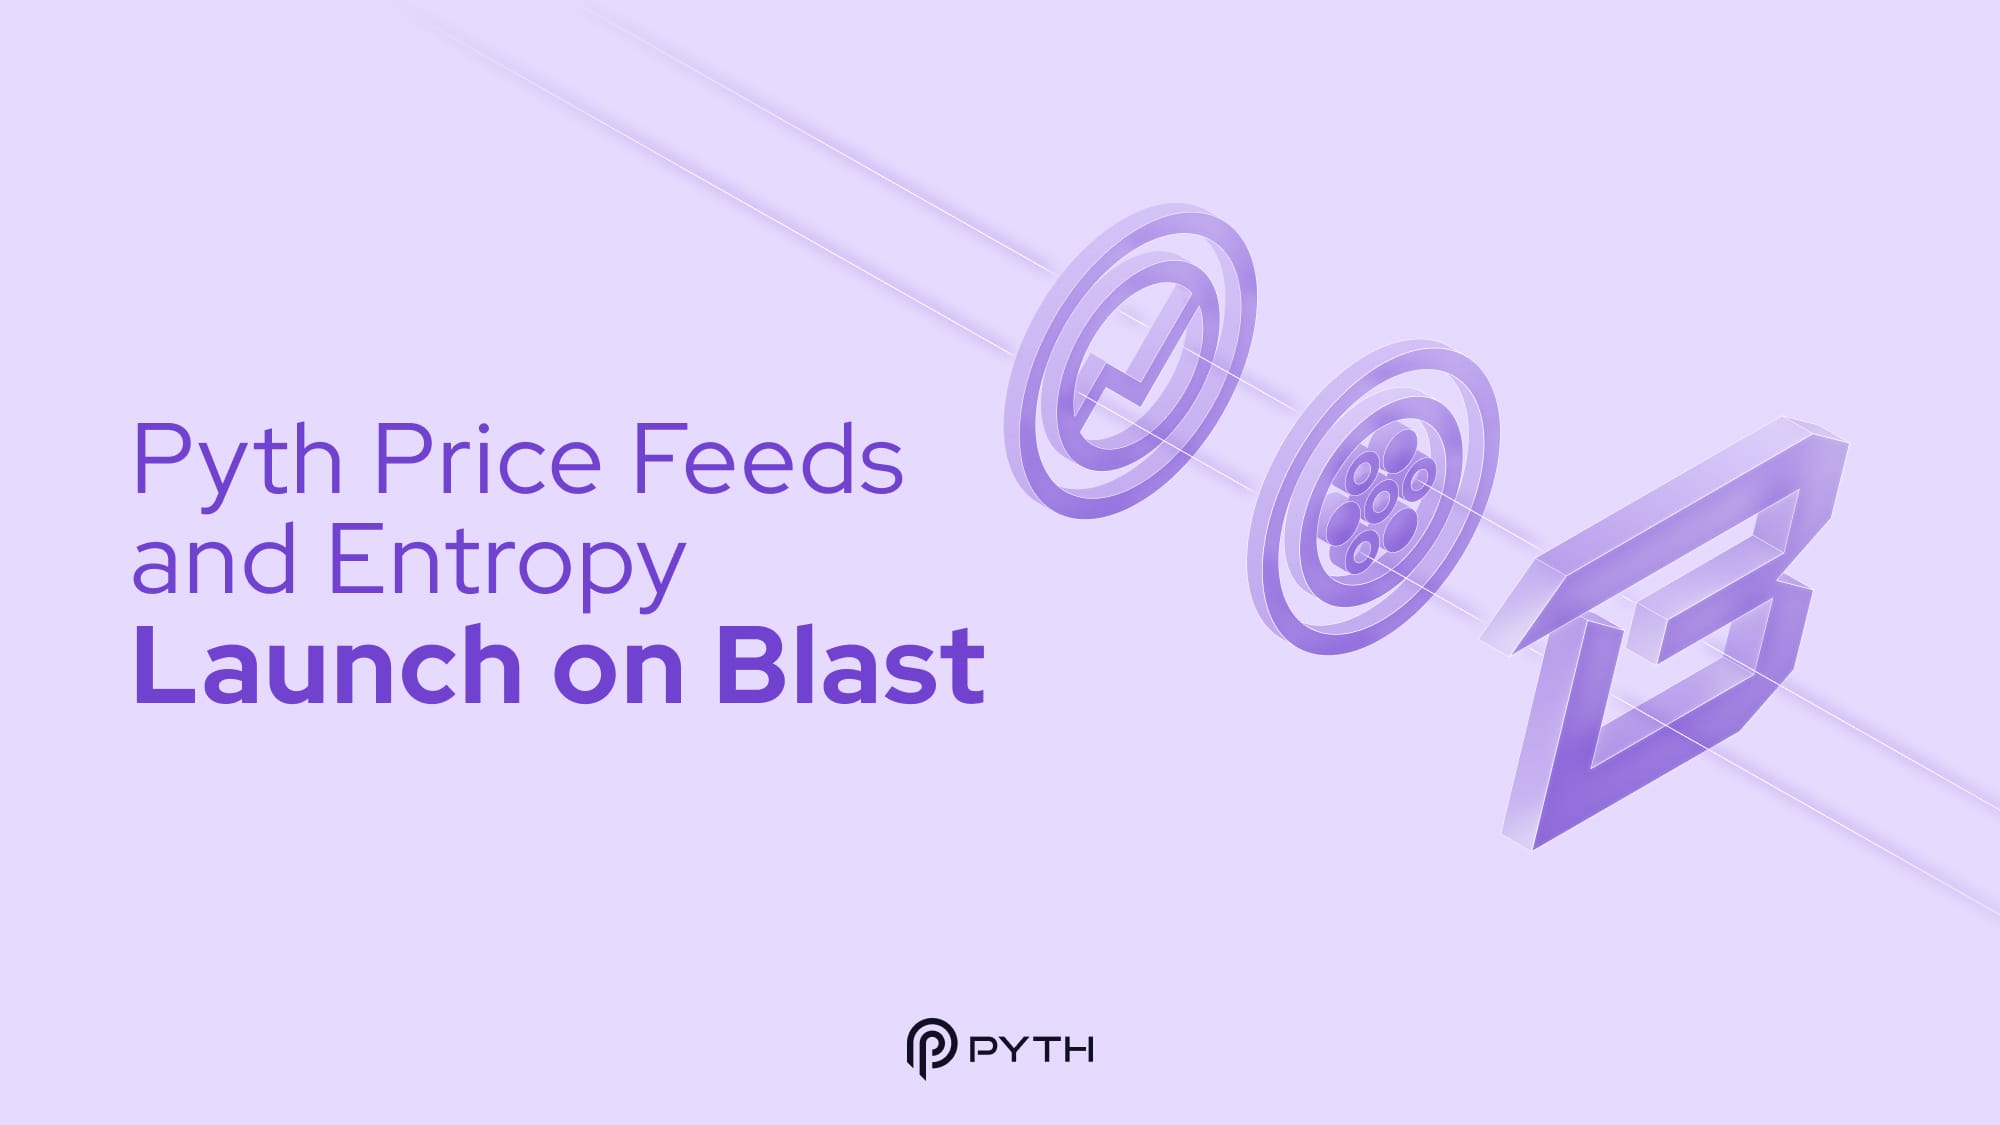 Pyth Price Feeds and Entropy Launch on Blast